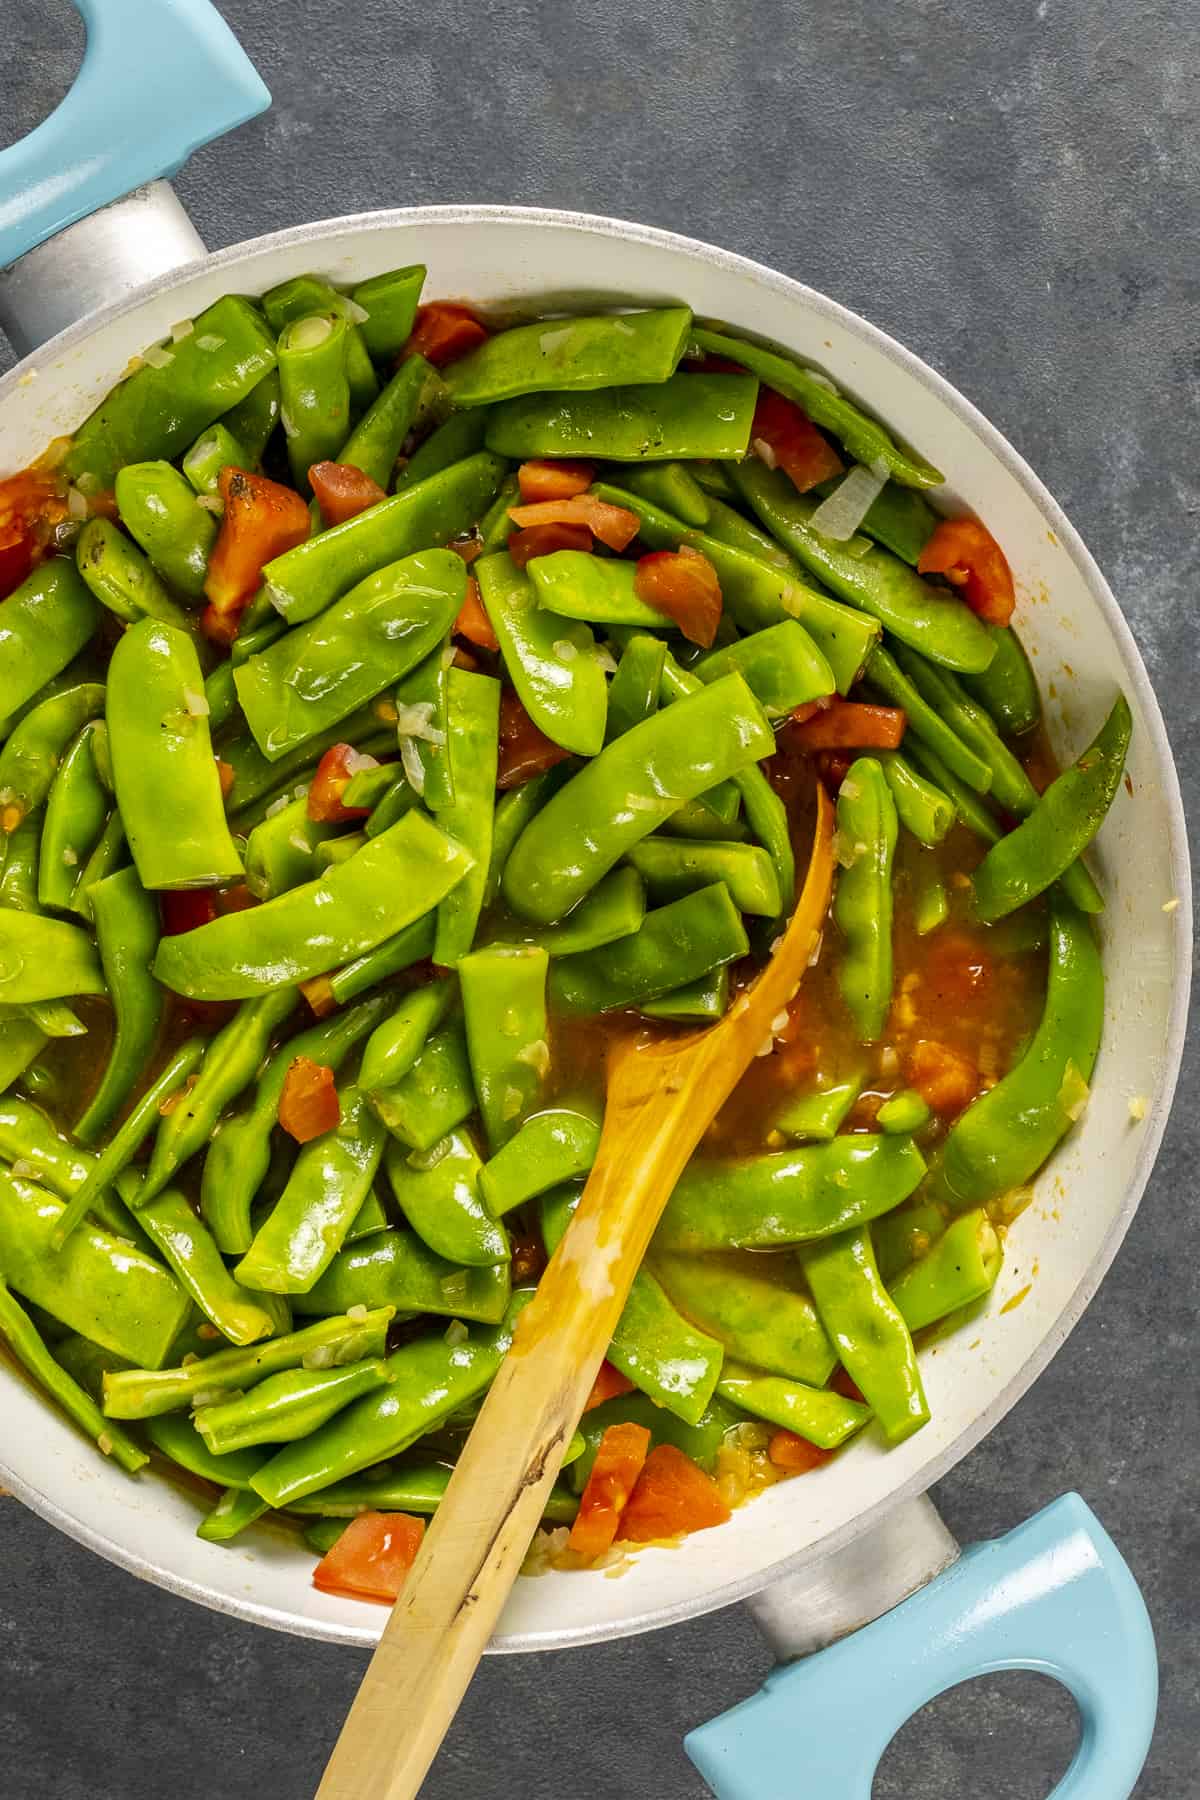 Chopped green beans and tomatoes cooking in a pot and a wooden spoon inside it.